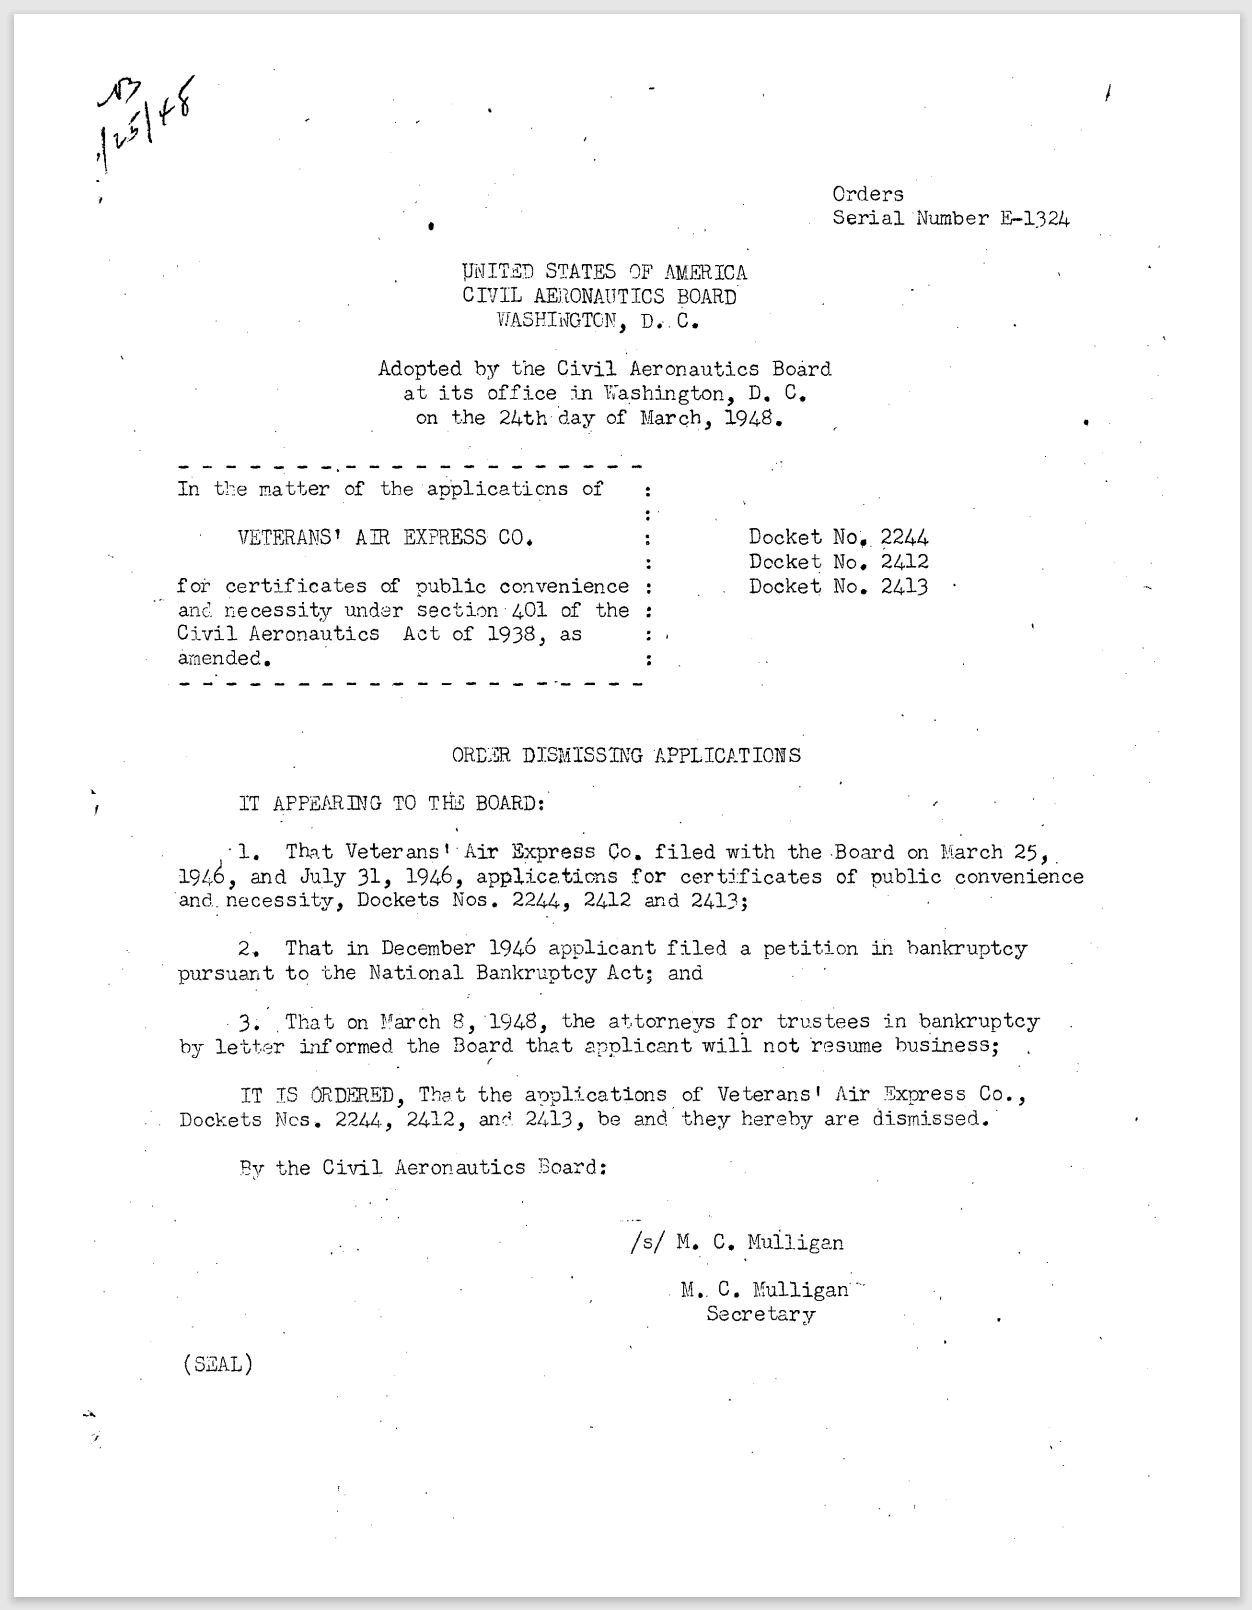 CAB single-page document dismissing two Veterans Air Express Co's applications for Certificates to operate as a non-sked service.